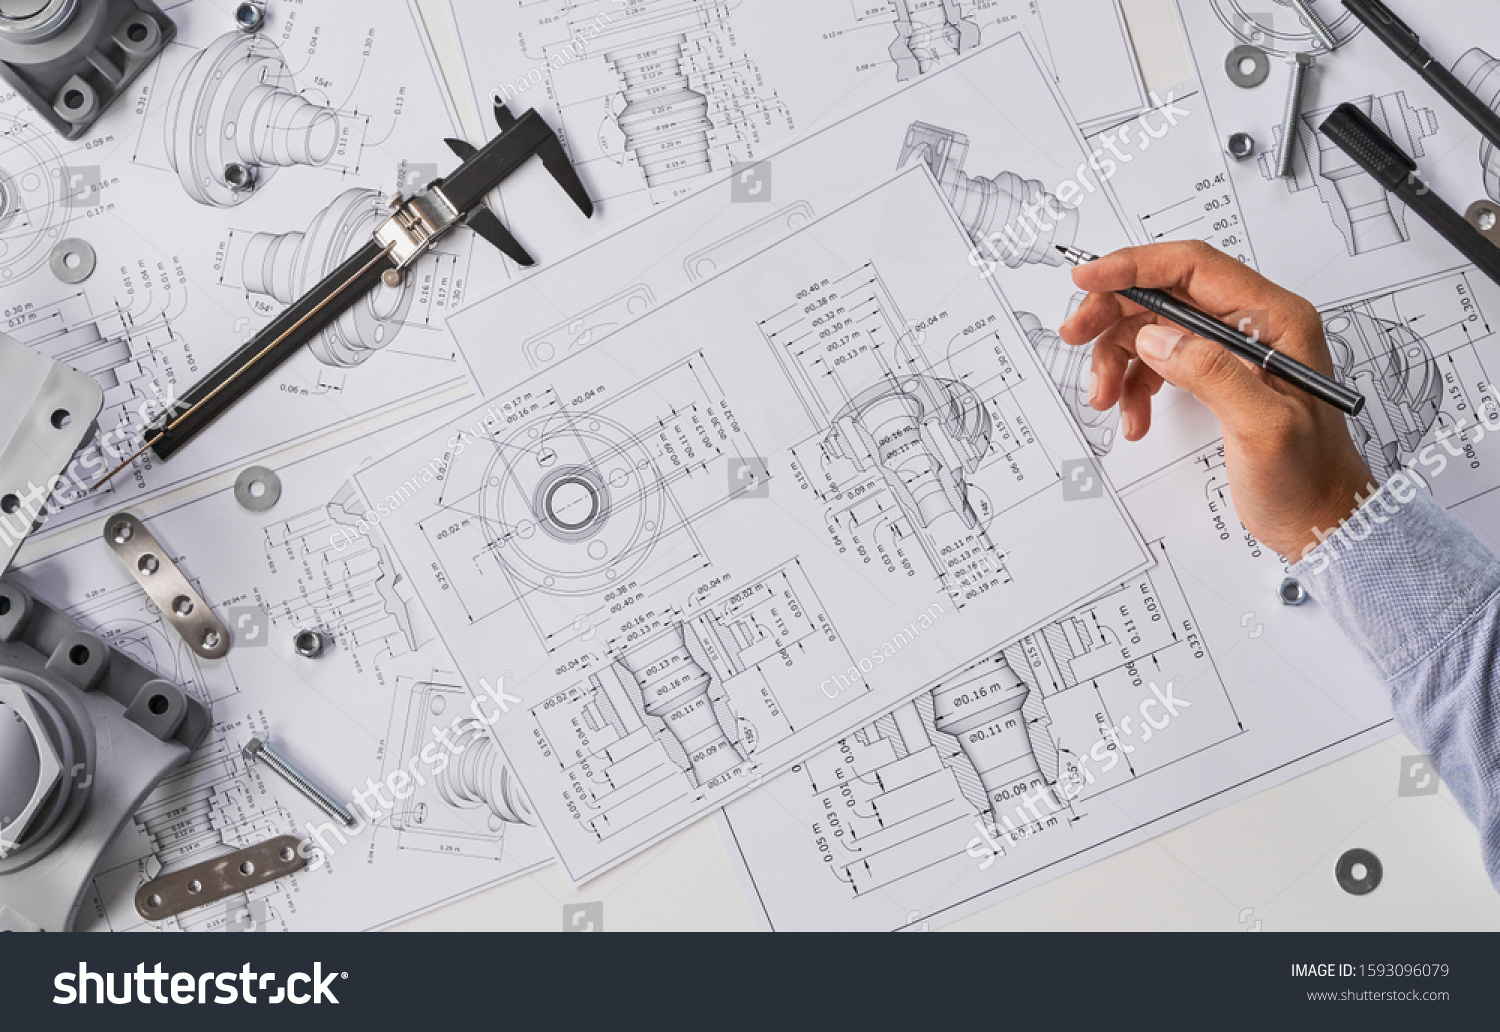 Engineer technician designing drawings mechanical parts engineering Engine
manufacturing factory Industry Industrial work project blueprints measuring bearings caliper tools #1593096079